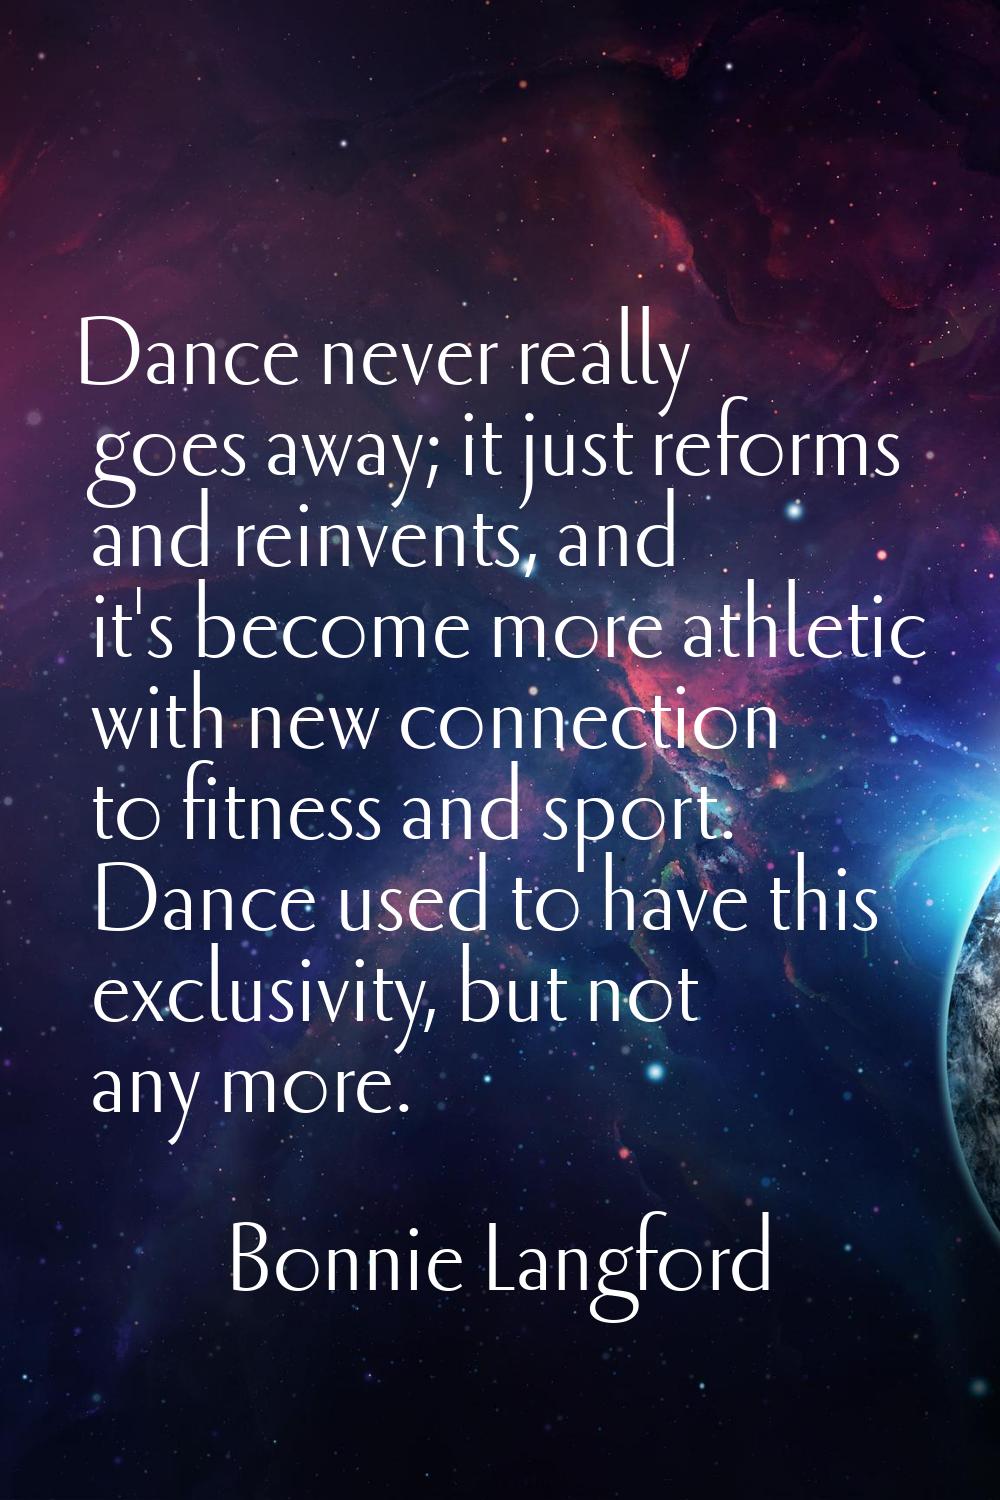 Dance never really goes away; it just reforms and reinvents, and it's become more athletic with new